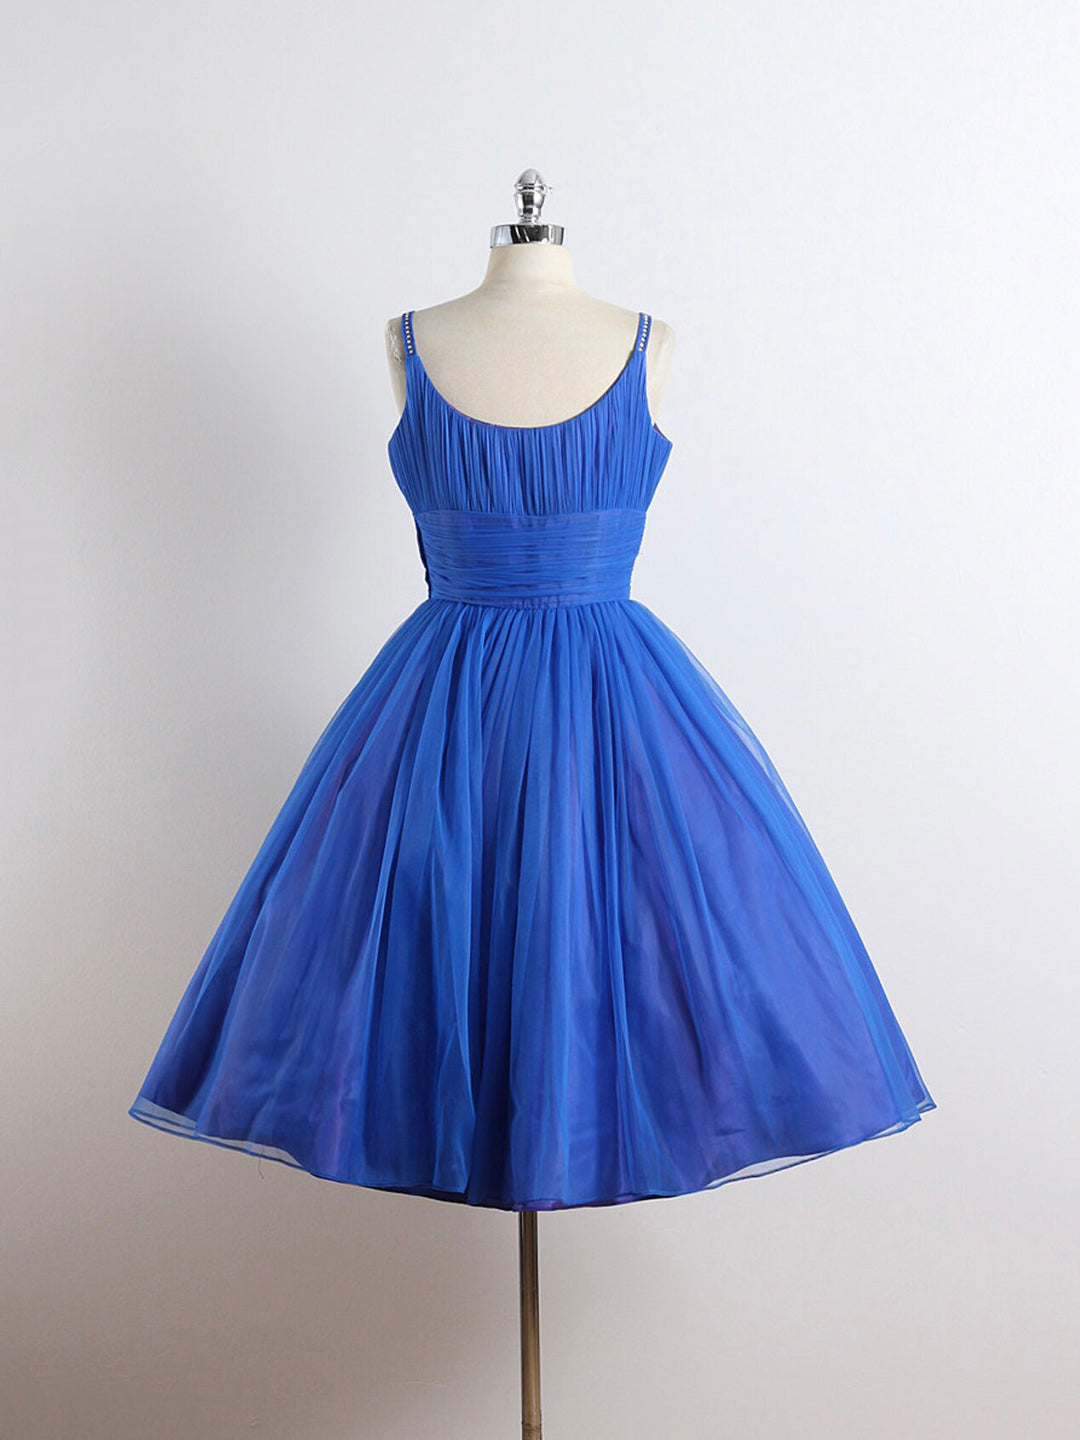 Red Formal Dress, Royal Blue Spaghetti straps Tulle A-line Short Prom Dress